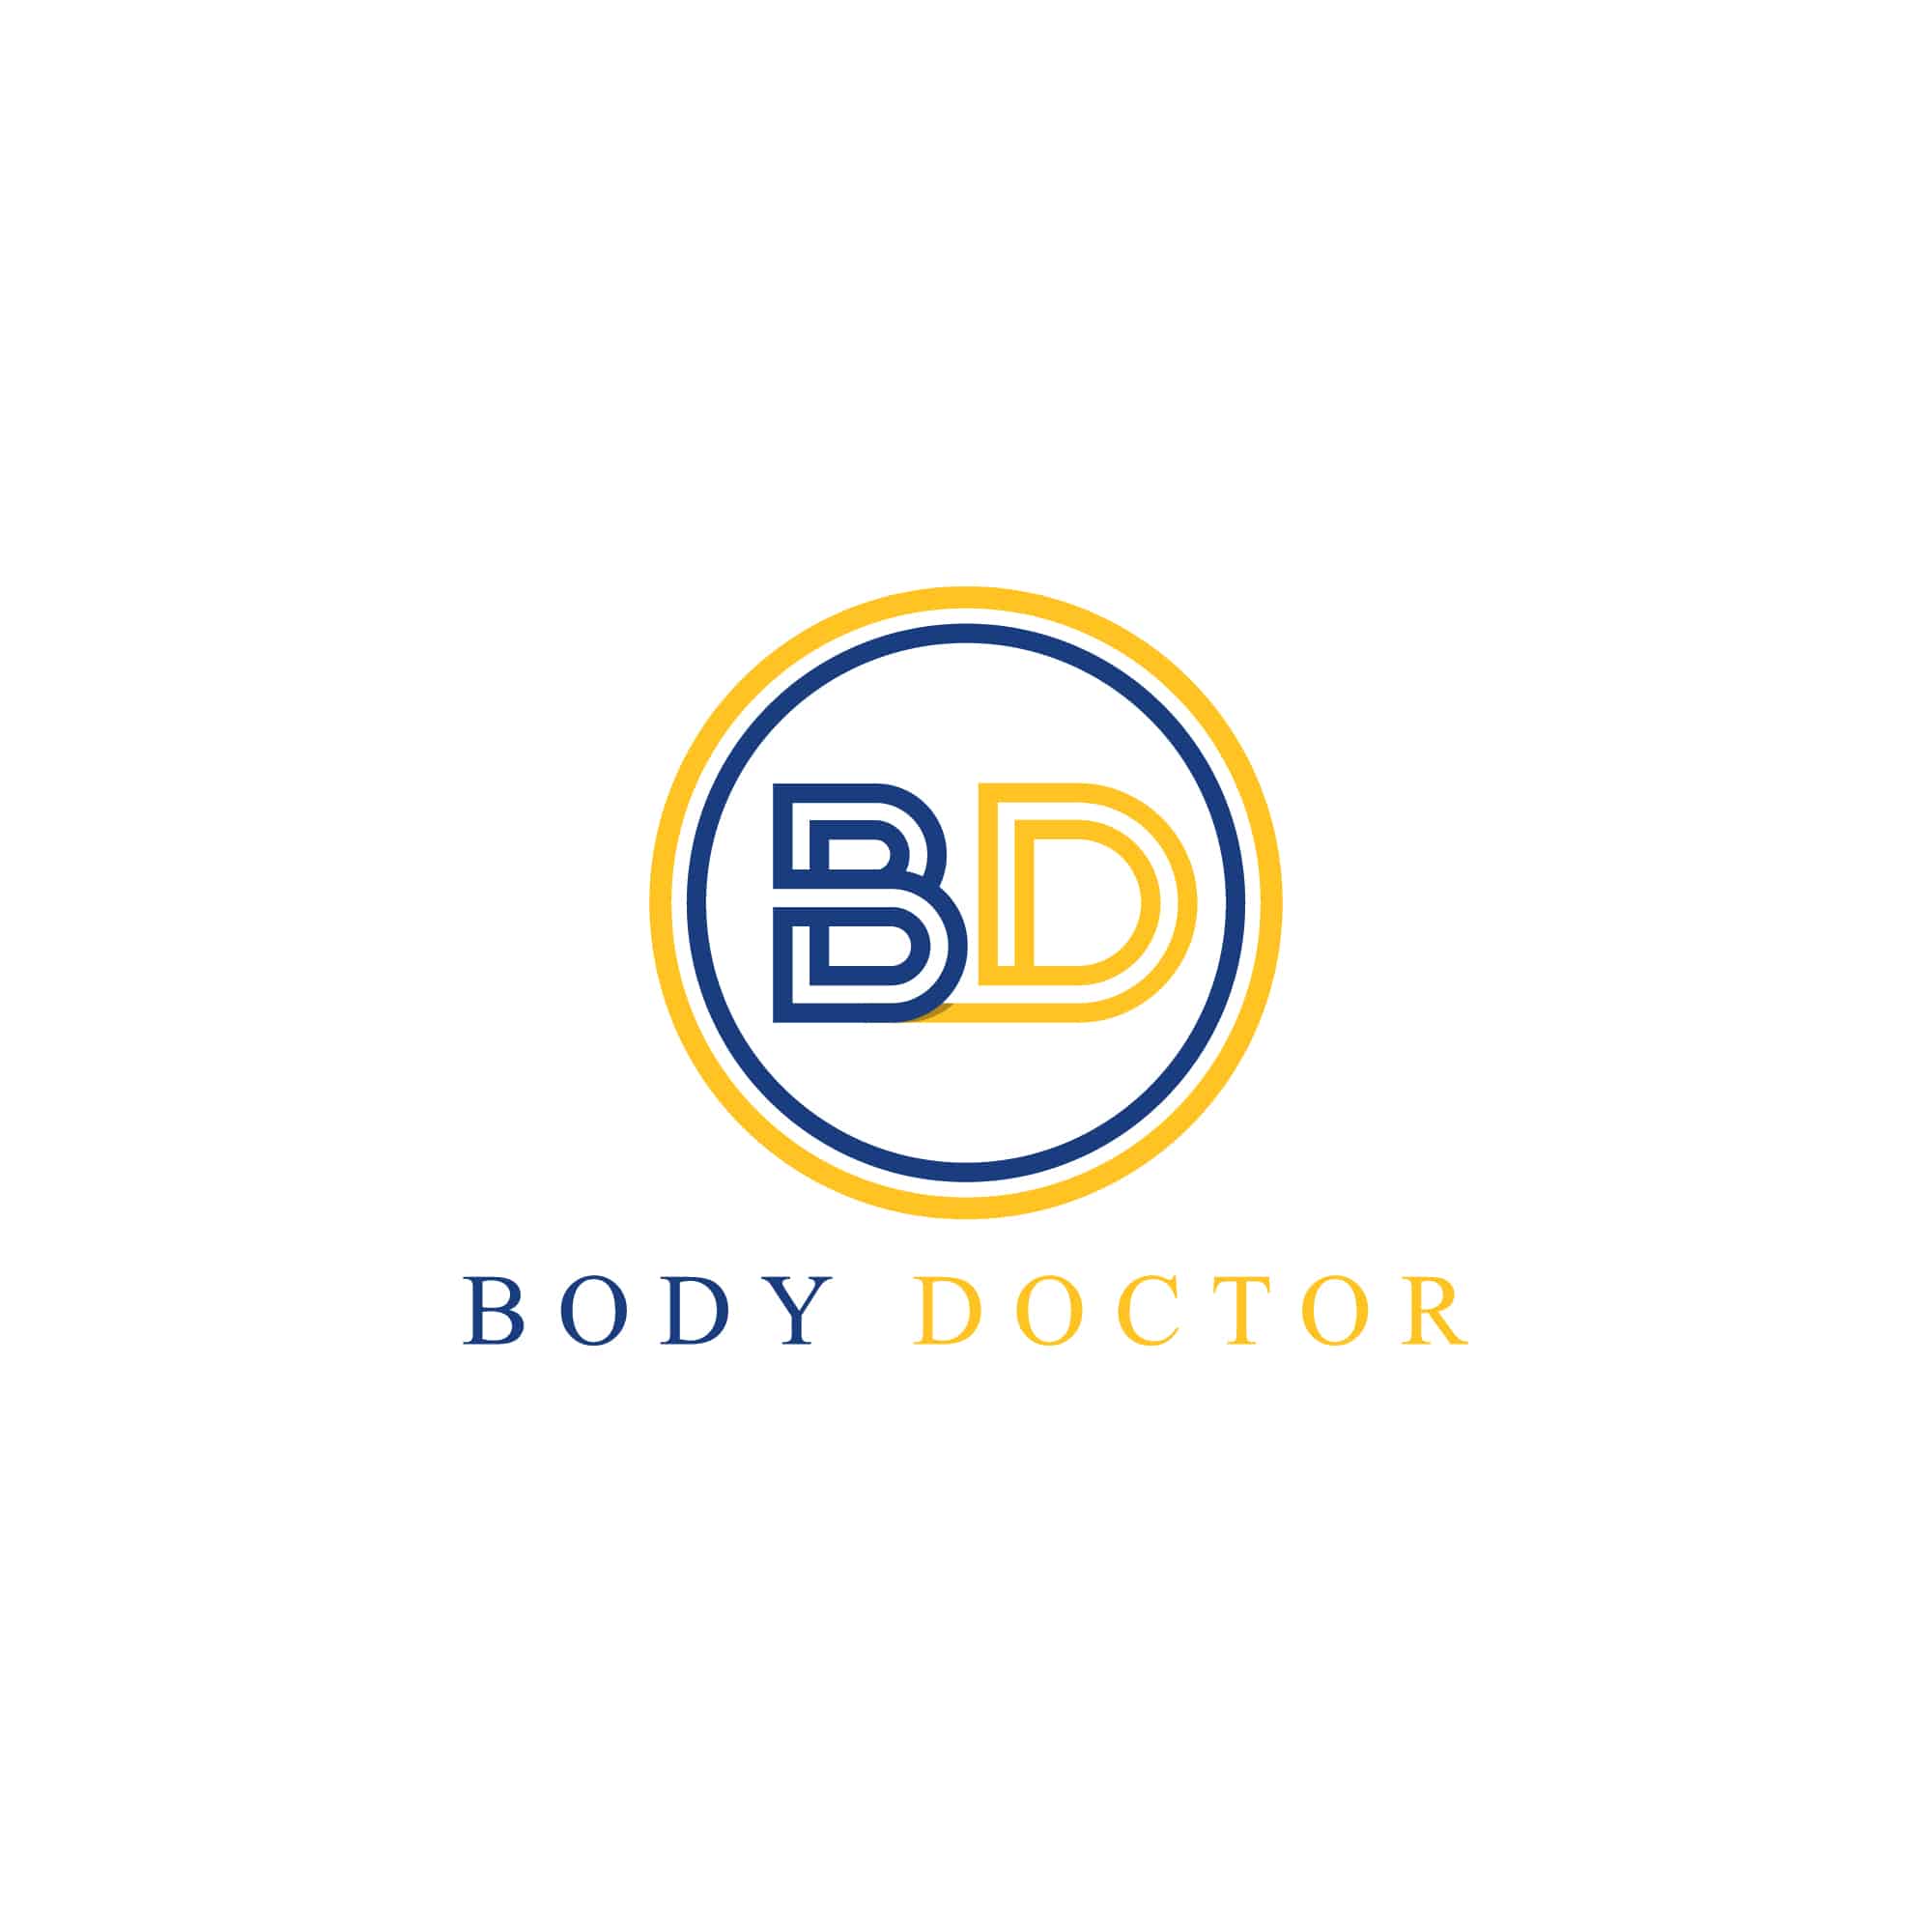 small business logo design services - body doctor